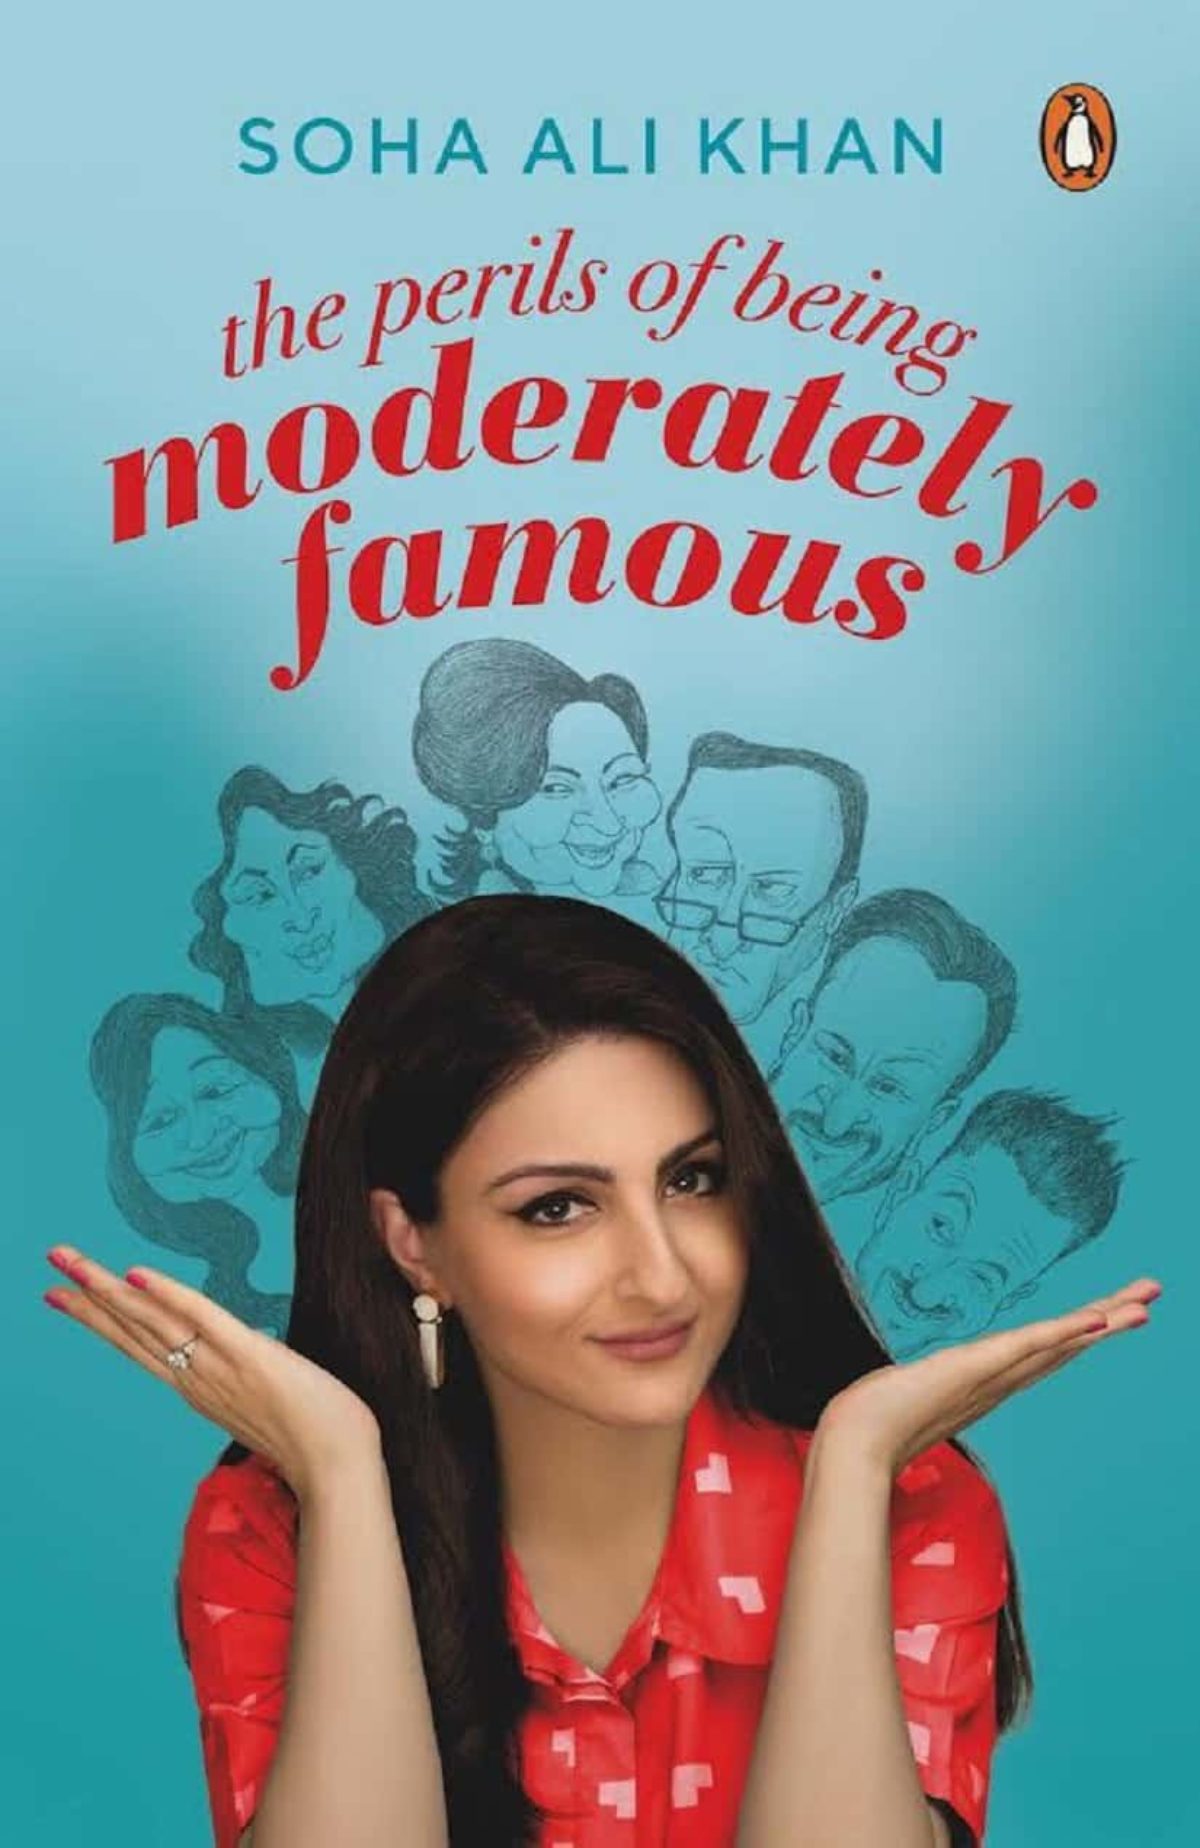 Soha Khan Sex Video - The Perils of Being Moderately Famous | Soha Ali Khan | Book Review